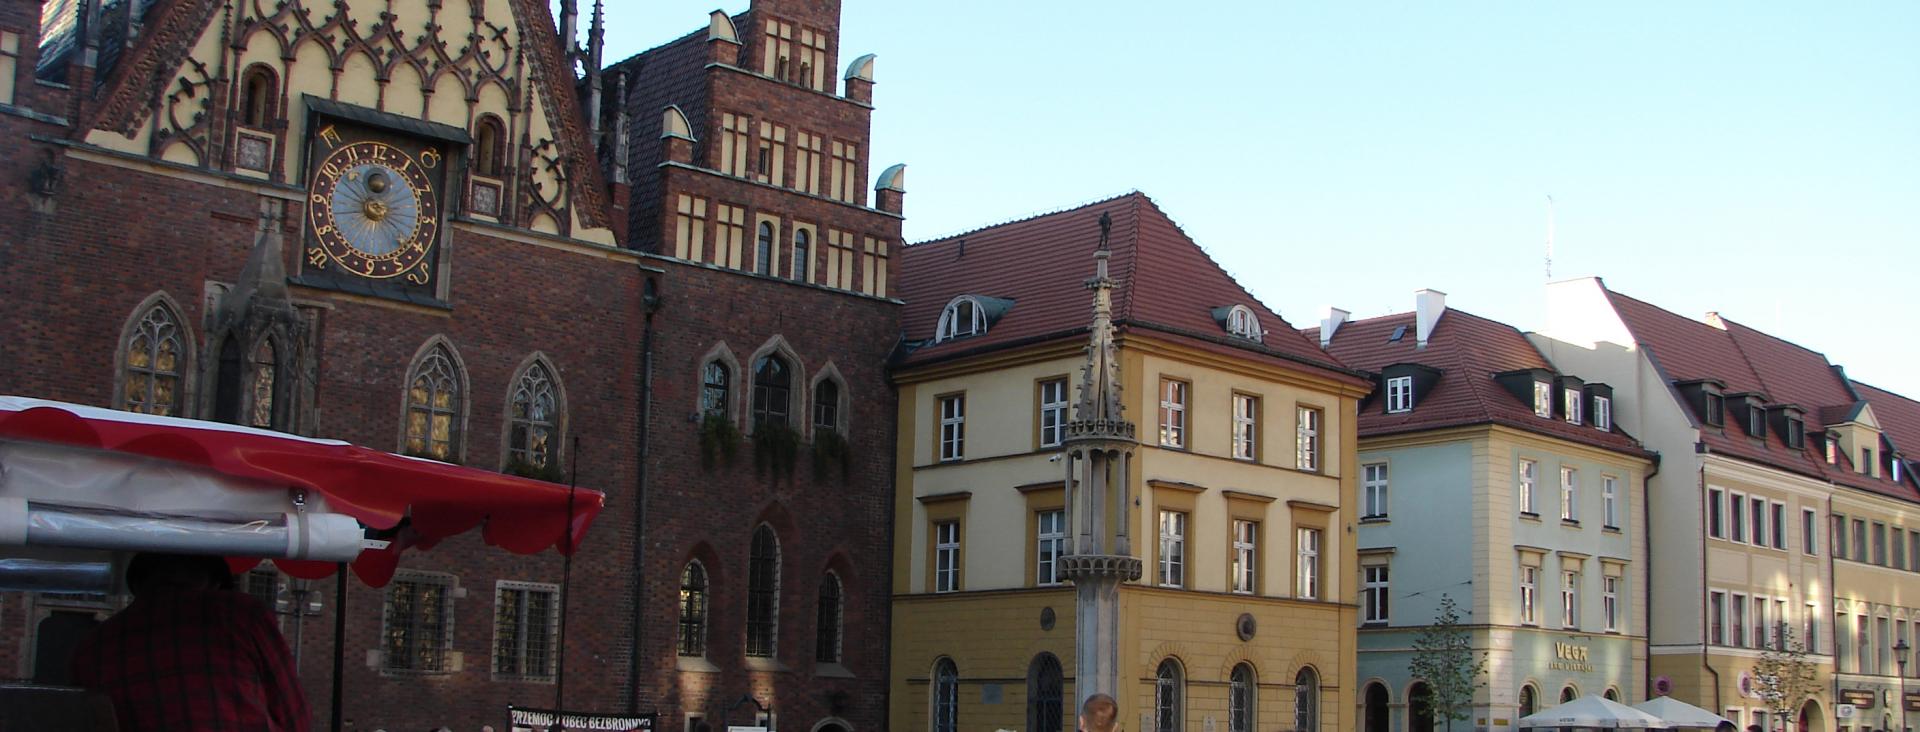 Wroclaw attractions